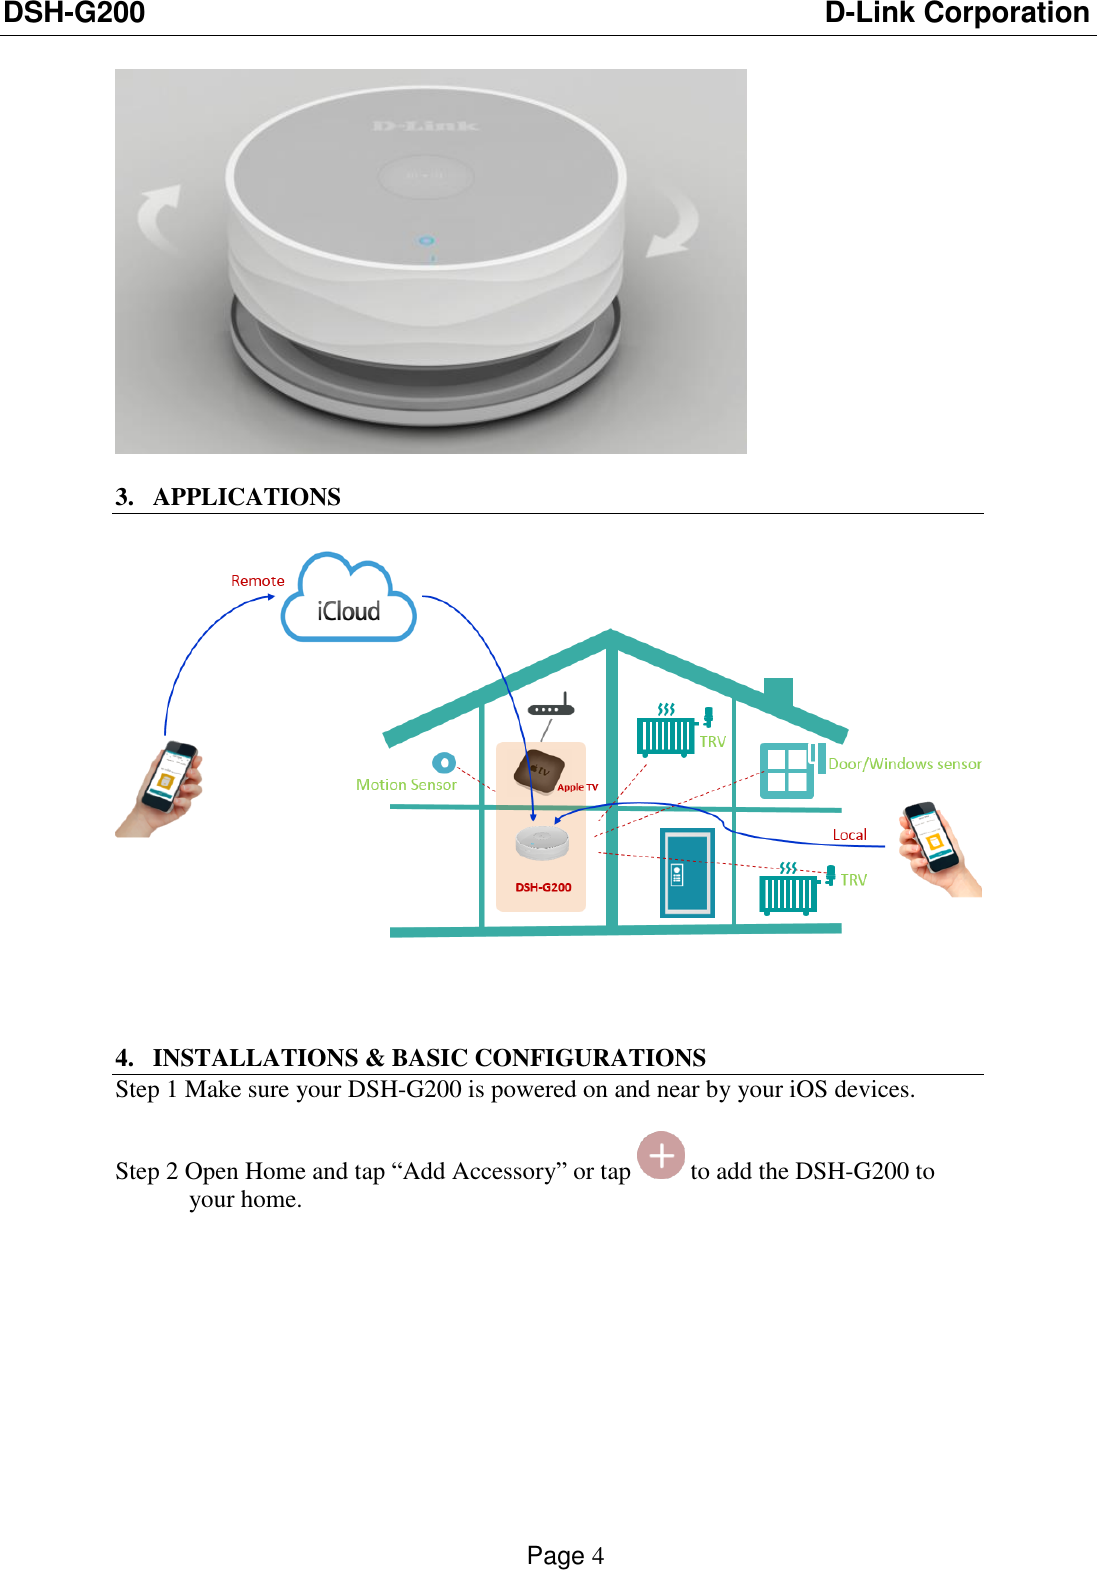 DSH-G200                          D-Link Corporation    Page 4    3. APPLICATIONS      4. INSTALLATIONS &amp; BASIC CONFIGURATIONS Step 1 Make sure your DSH-G200 is powered on and near by your iOS devices.              Step 2 Open Home and tap “Add Accessory” or tap   to add the DSH-G200 to your home. 